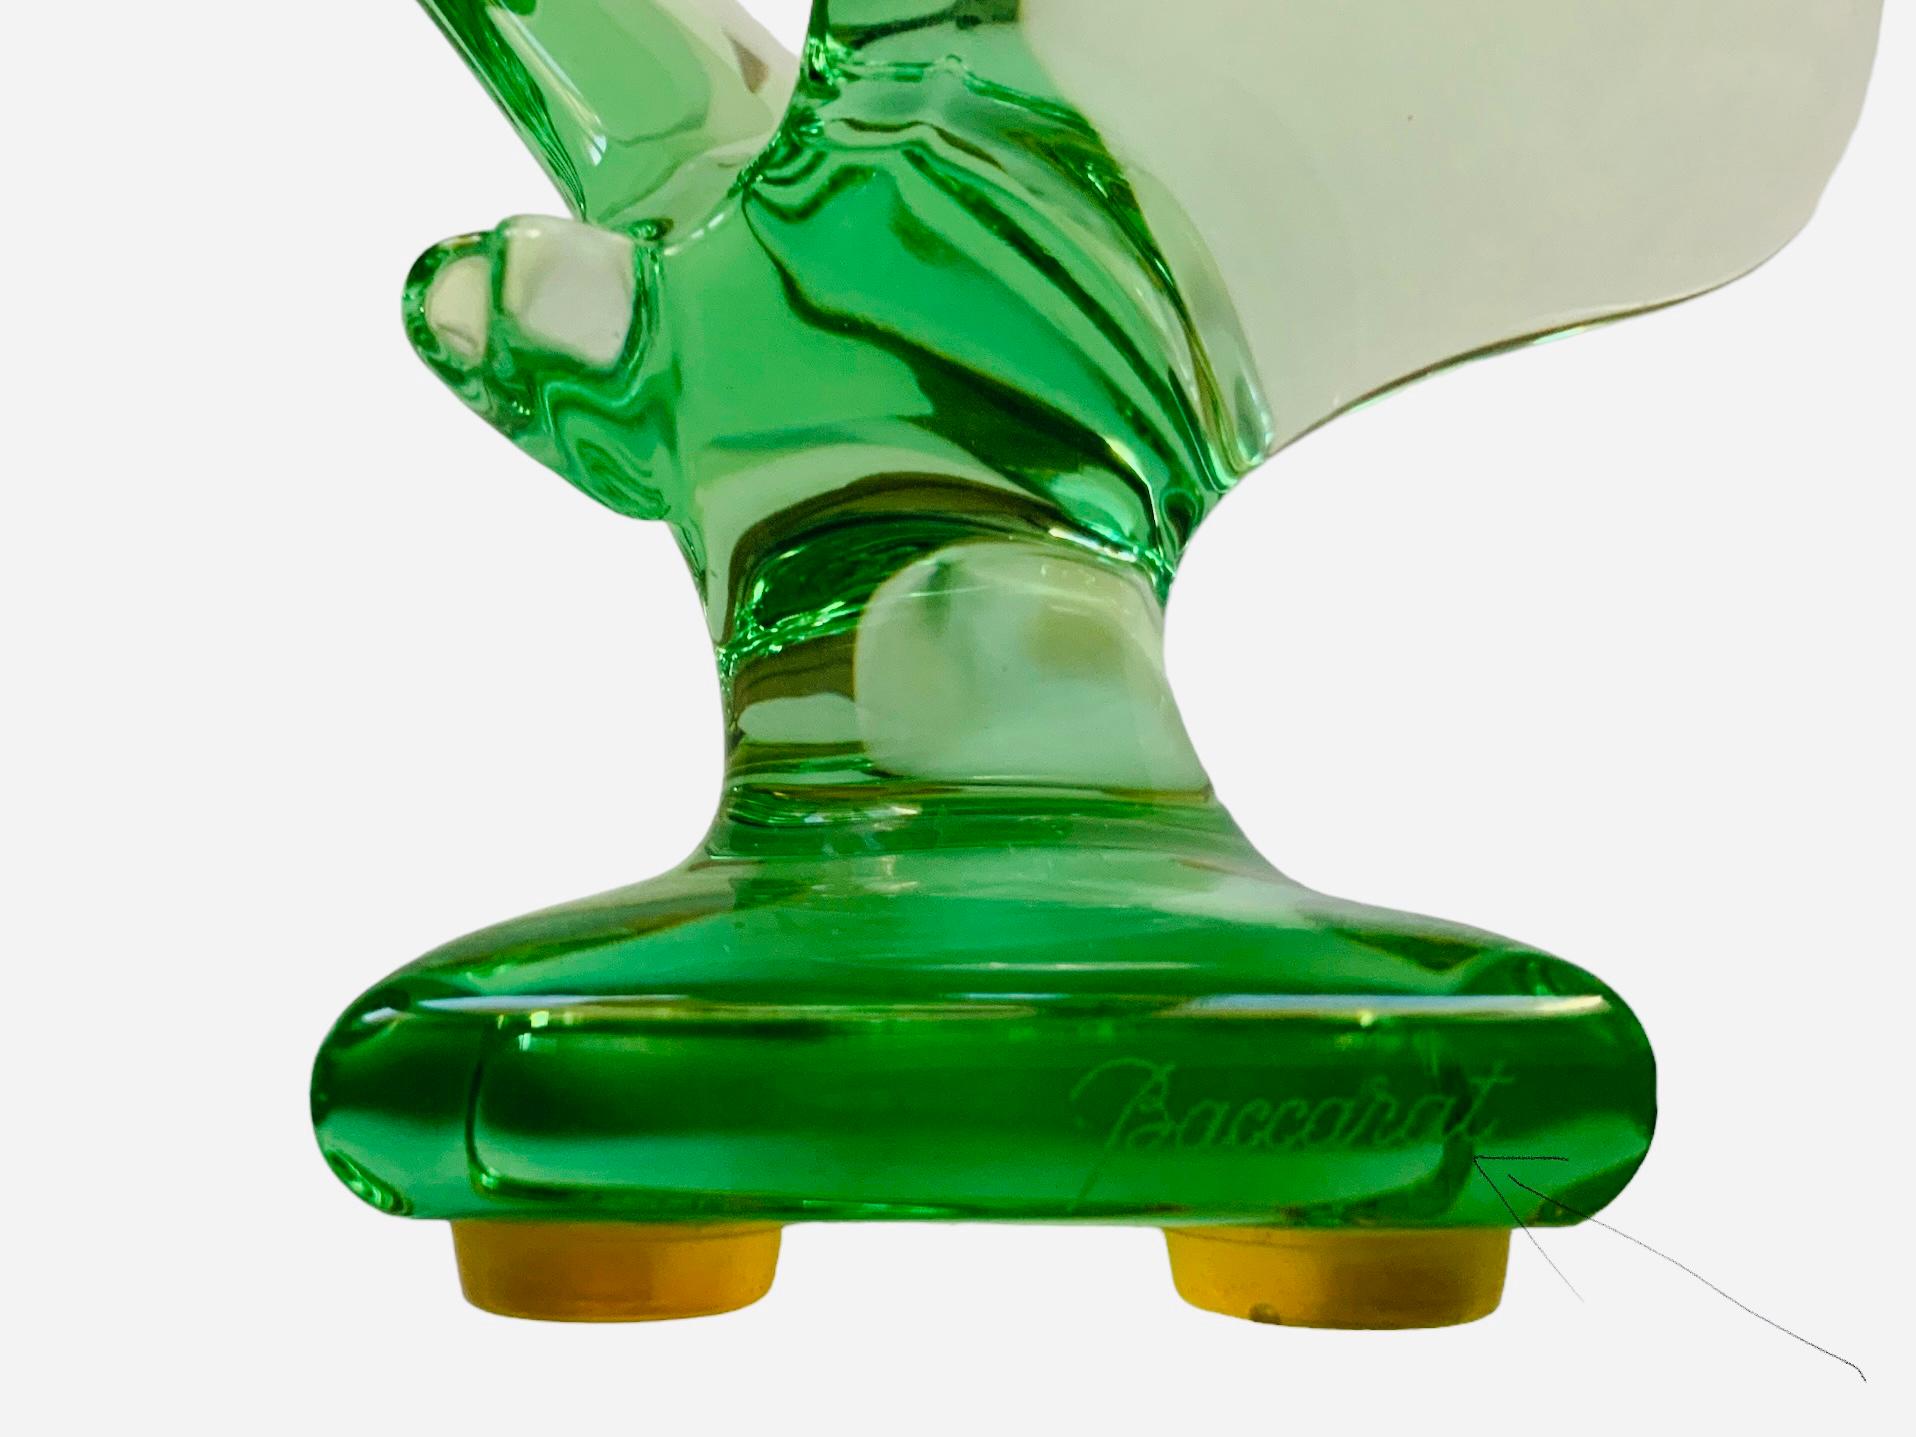 This is a Baccarat Crystal Butterfly sculpture/figurine . It depicts a light green translucent crystal butterfly with its large wings open up supported also by a square crystal base. It has the acid etched hallmark of Baccarat, France in one of the